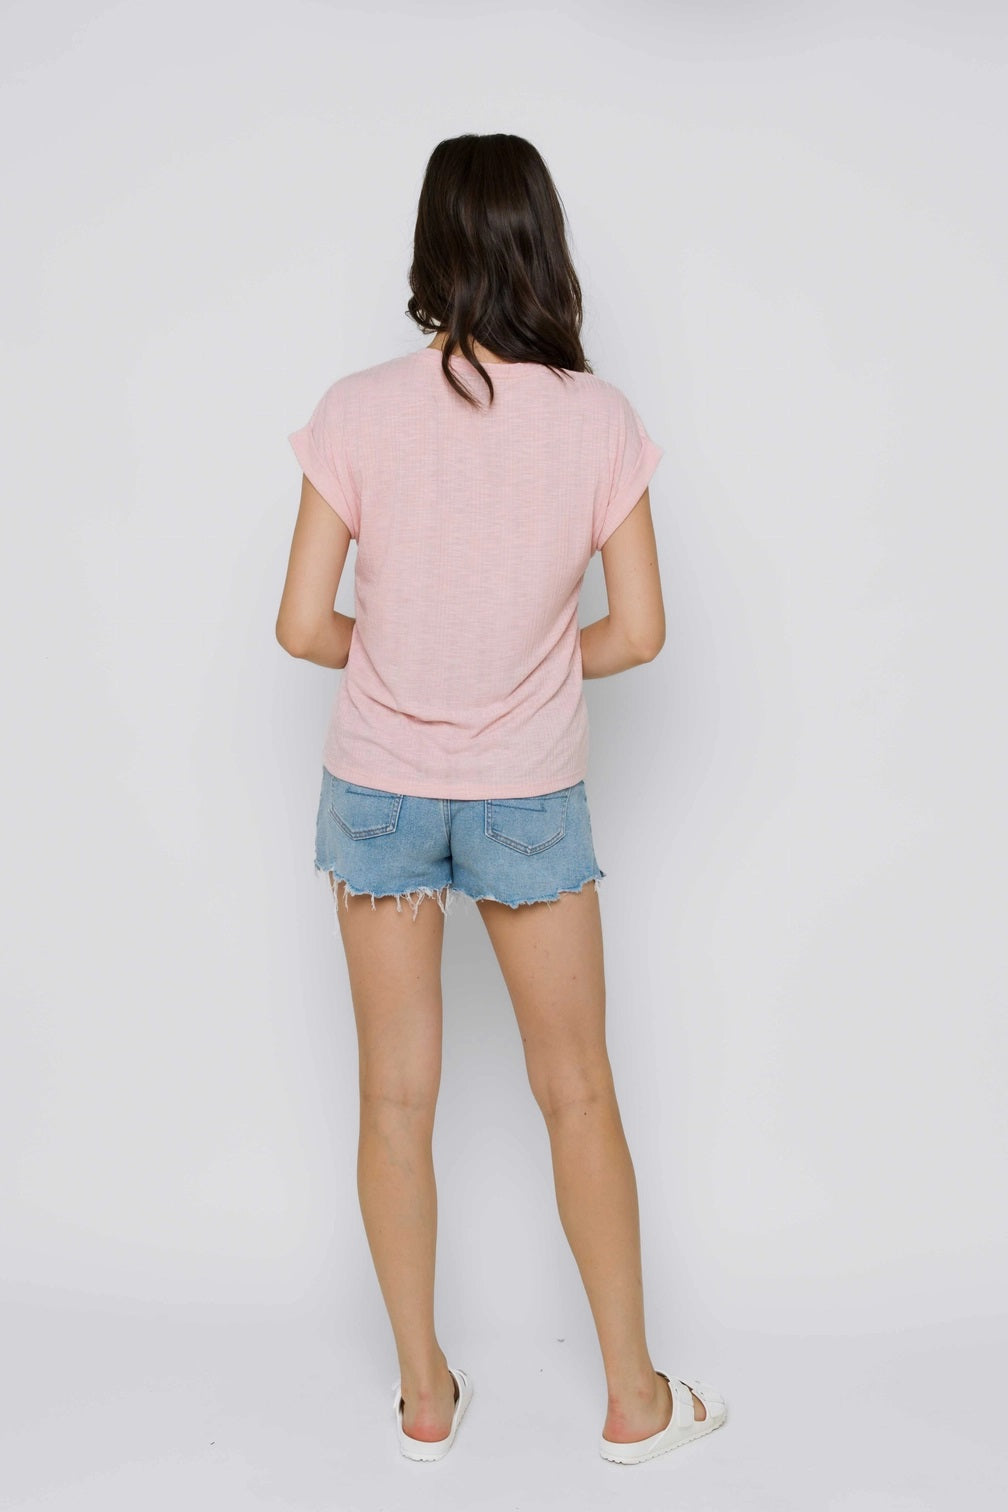 DAISY TEXTURED TEE- black, white, soft pink or sky blue